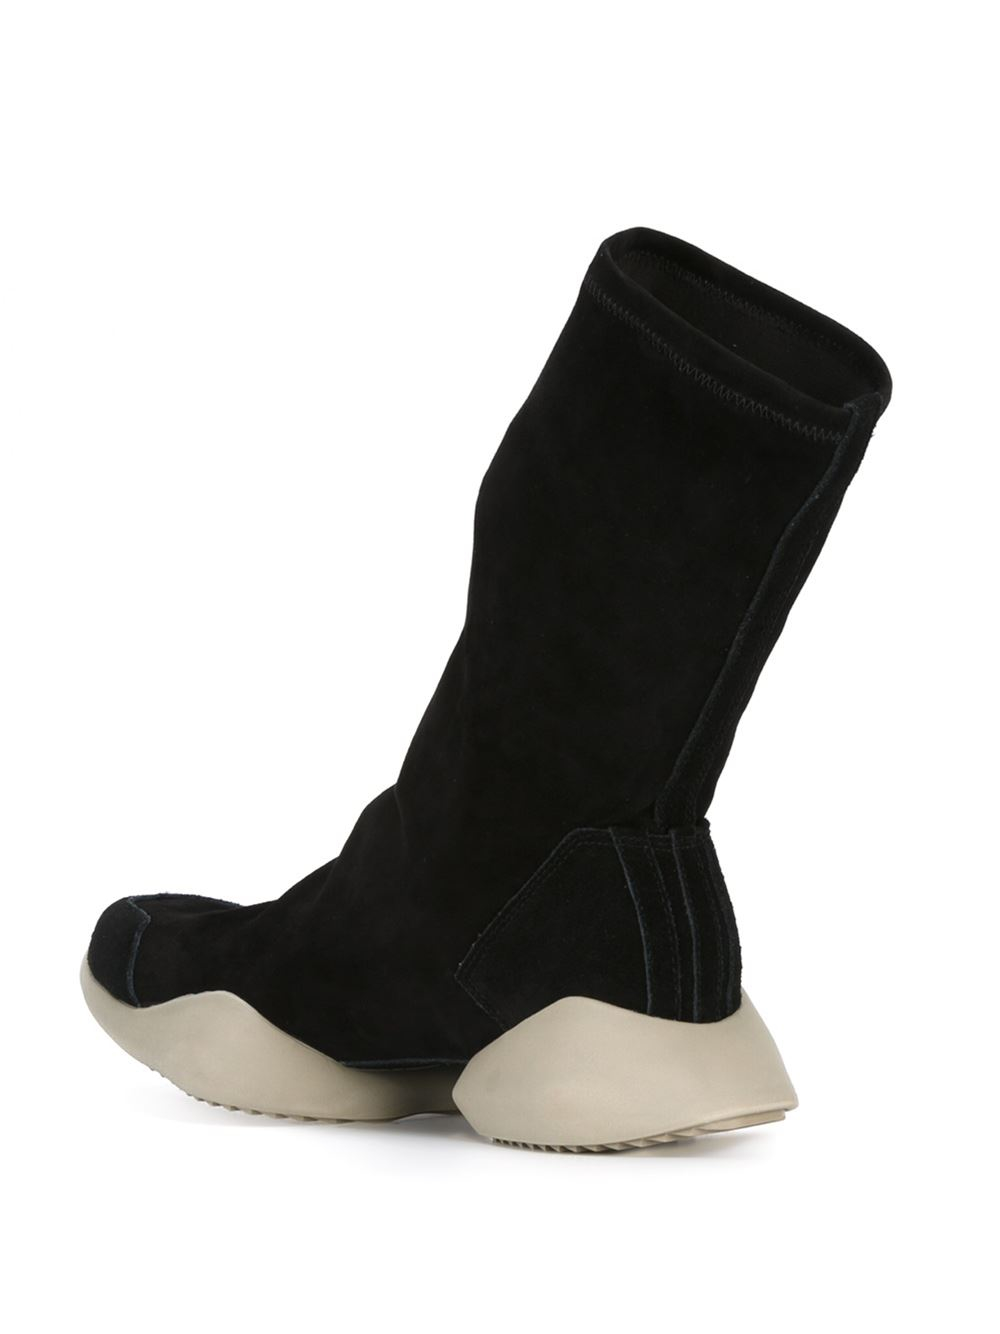 Rick Owens ' X Adidas Runner' Boots in Black for Men | Lyst